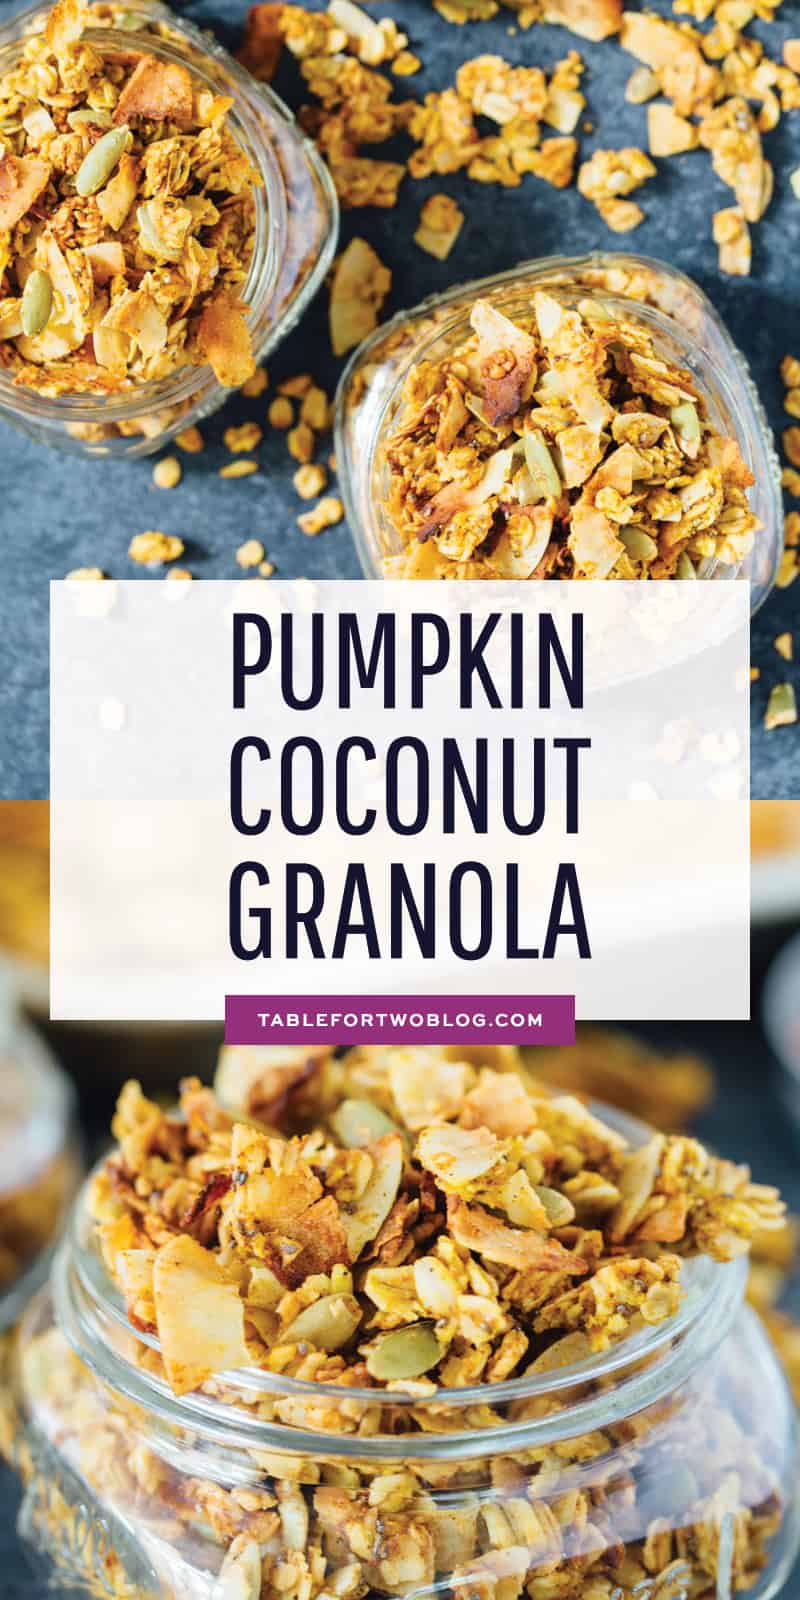 This pumpkin coconut granola has all the flavors of Fall in this sweet and salty combination! It's perfect to top on plain yogurt, oats, or even with milk! #granola #pumpkincoconut #coconut #pumpkinrecipe #granolarecipe